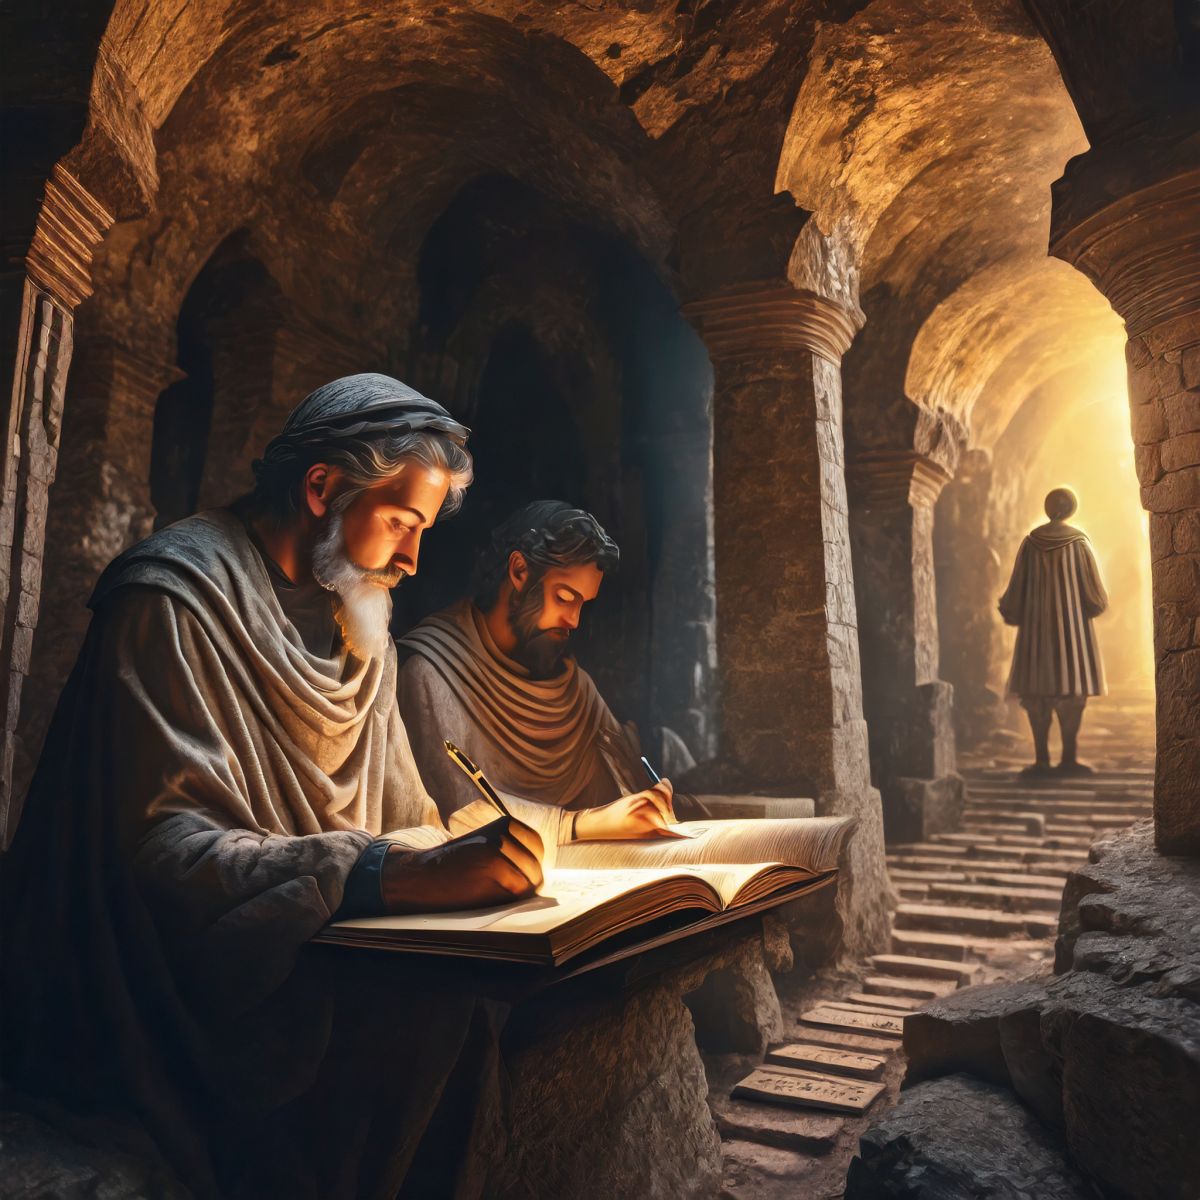 Early Christian theologians writing in secret in the catacombs of Rome.